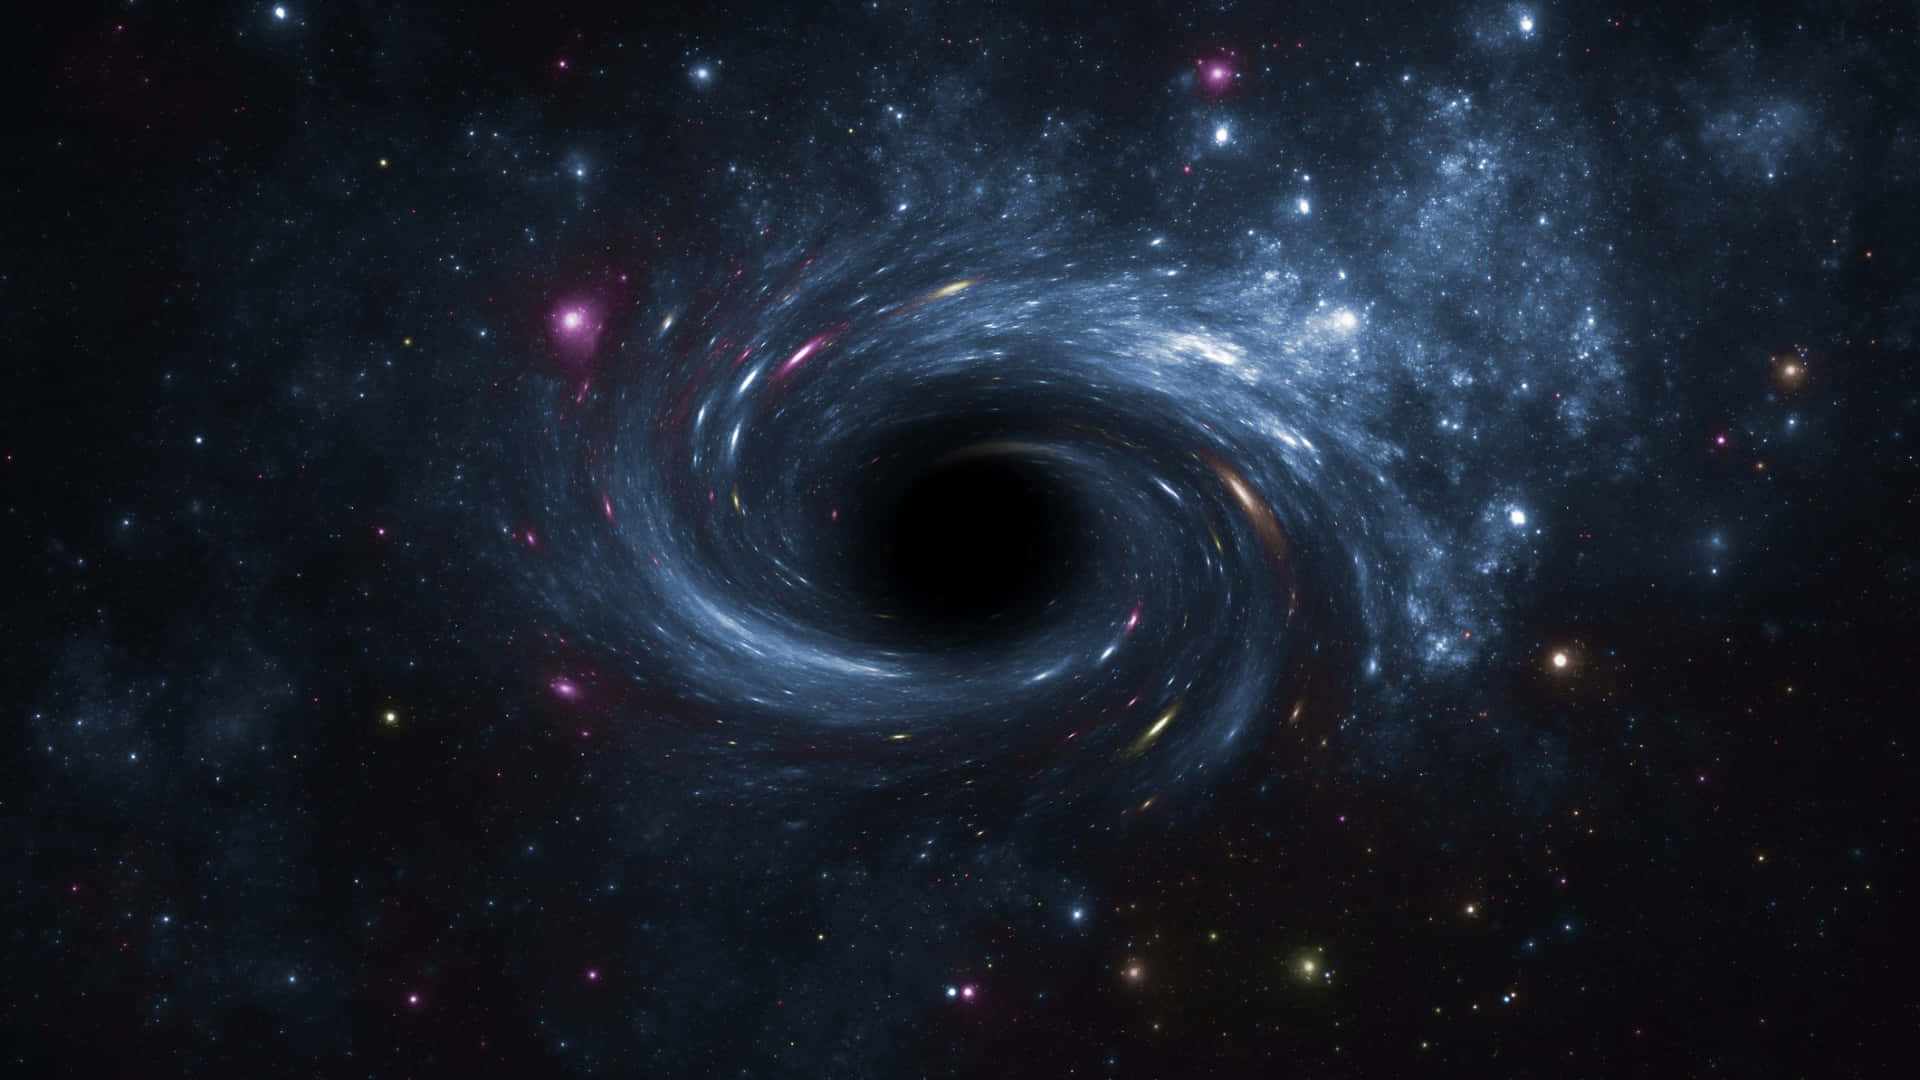 A view of the Black Hole taken with the Hubble Telescope